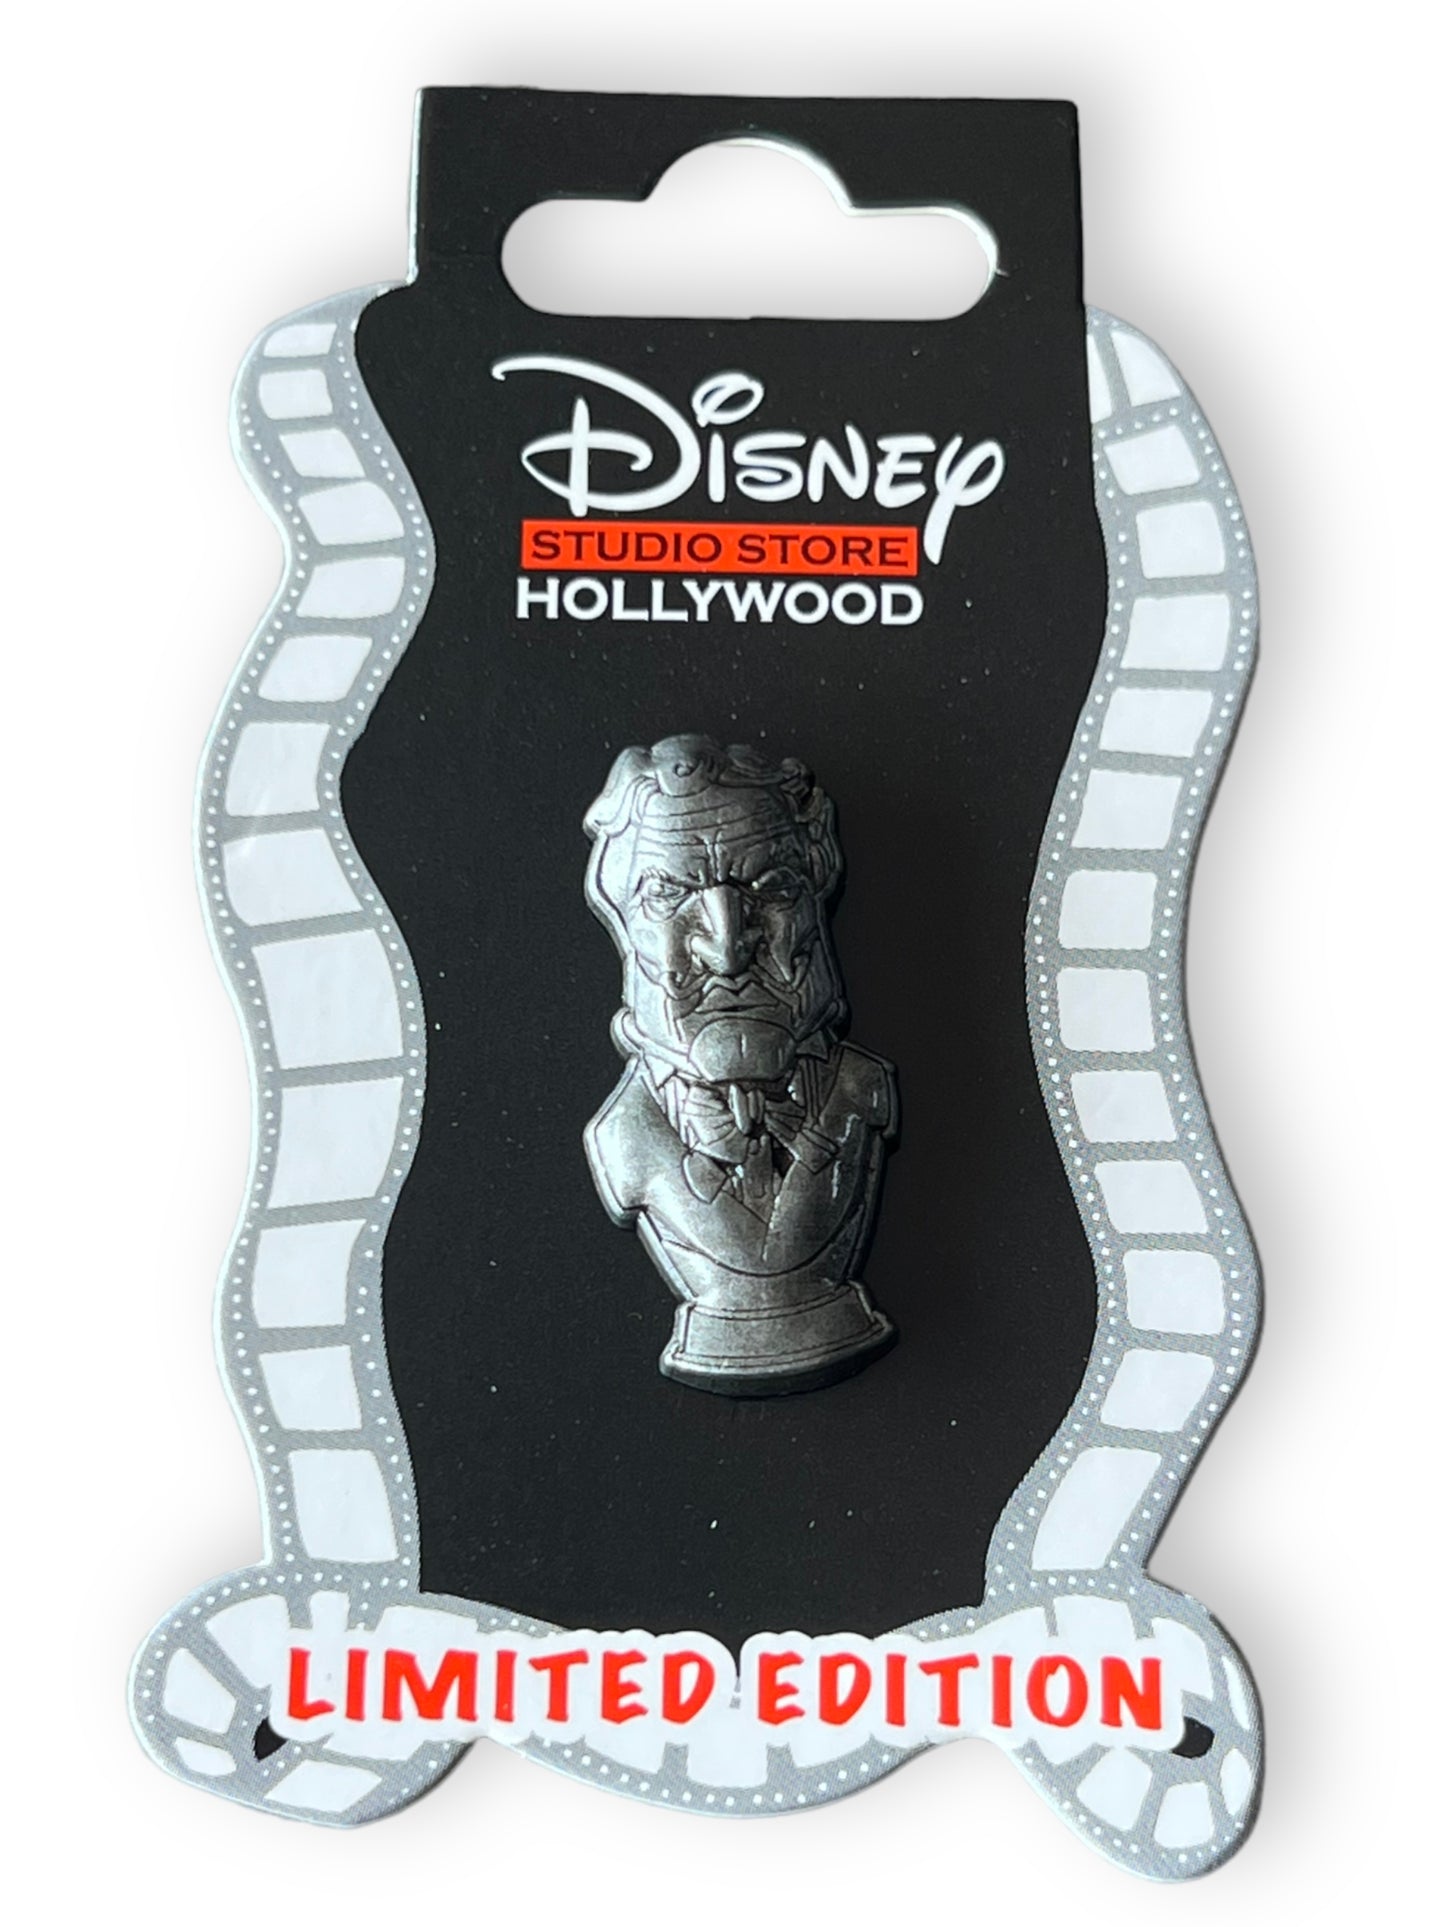 DSSH Haunted Mansion Statue Bust #3 Pin